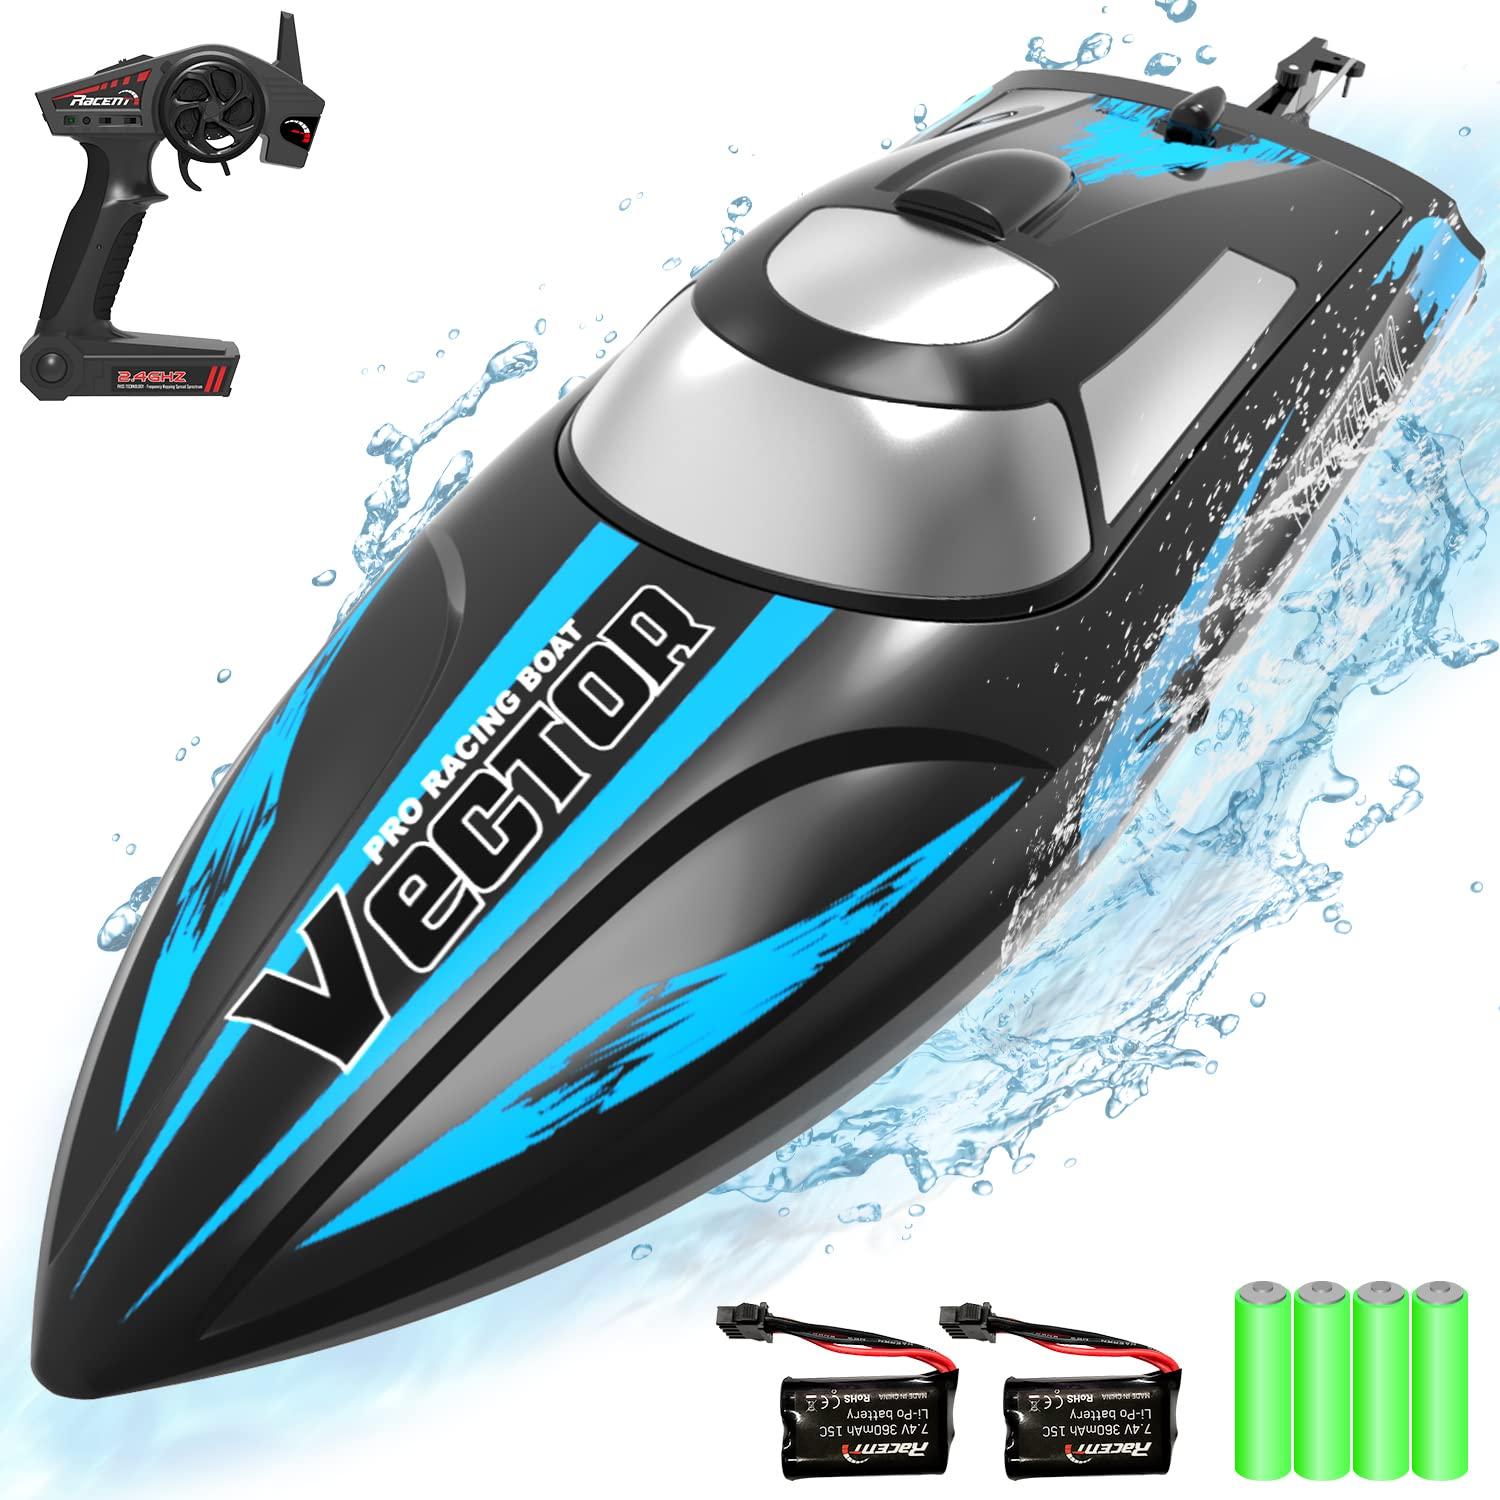 Fastest Rc Boat You Can Buy: Types of Fastest RC Boats